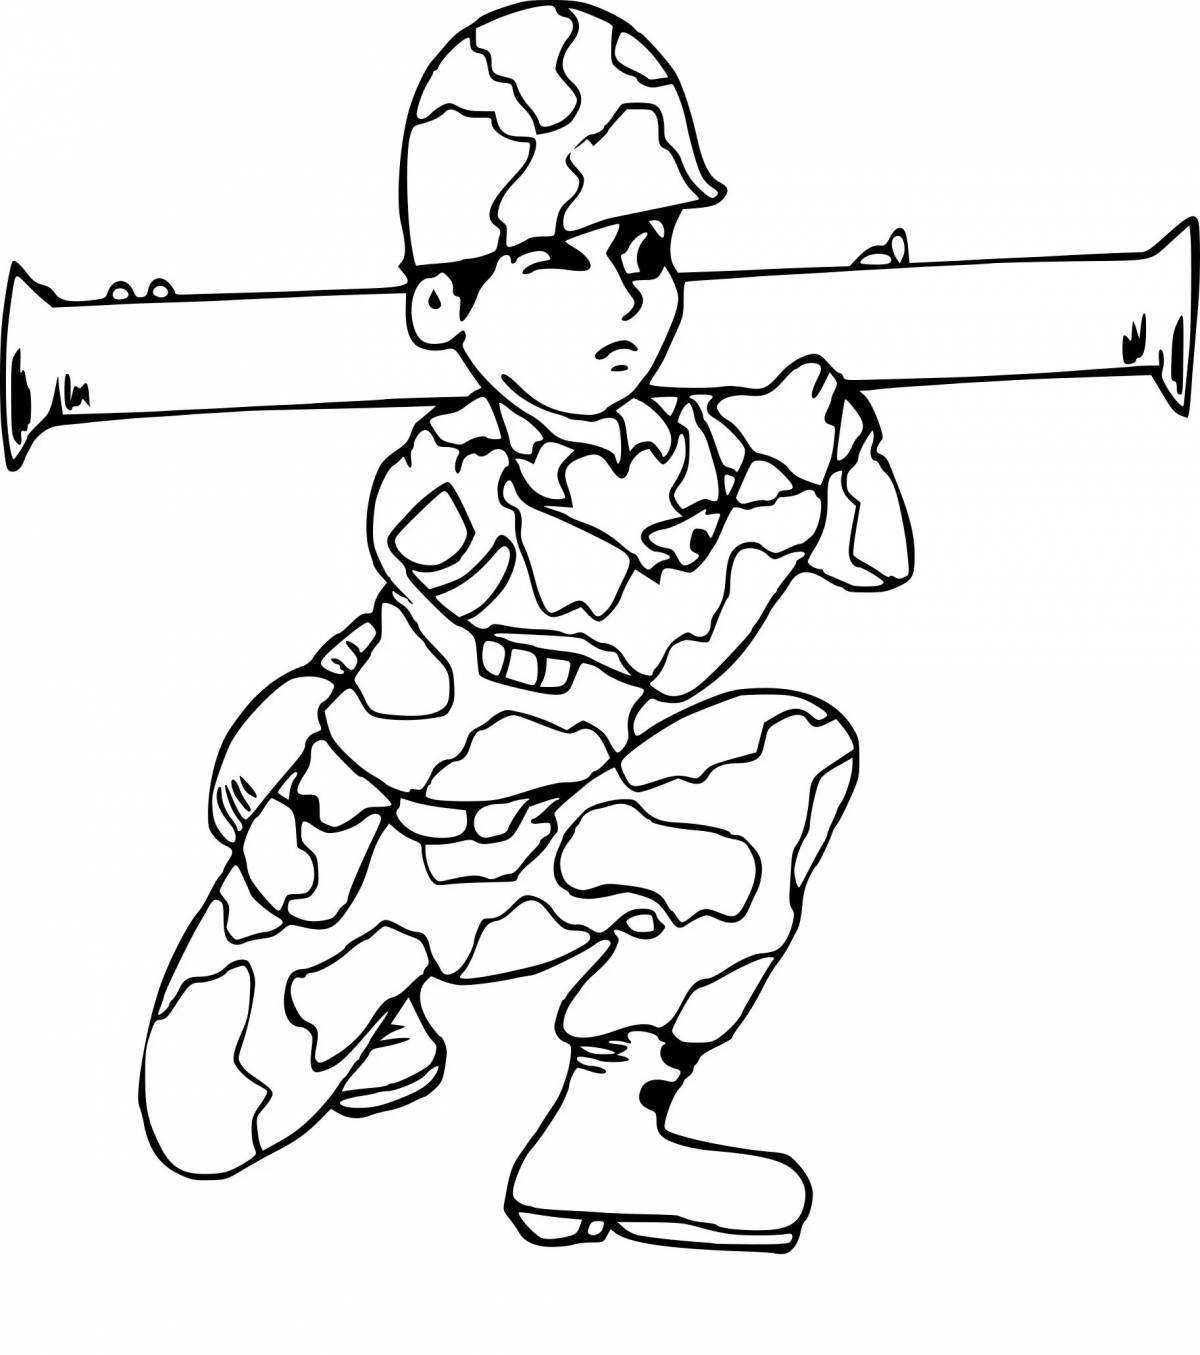 Dashing military coloring pages for boys